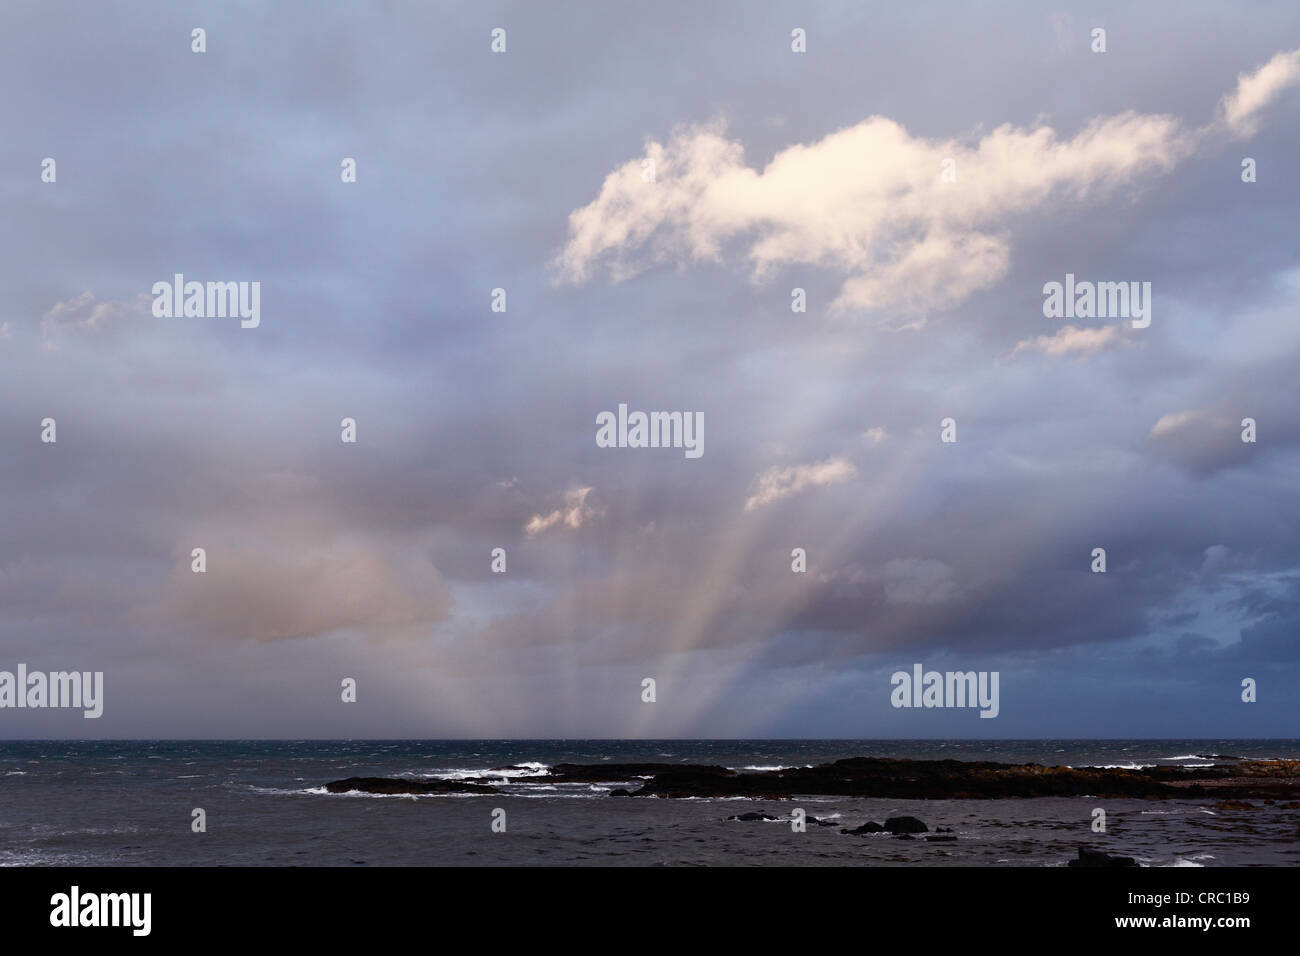 Cloudy sky clouds with sun rays, Donaghadee, County Down, Northern Ireland, Ireland, United Kingdom, Europe, PublicGround Stock Photo